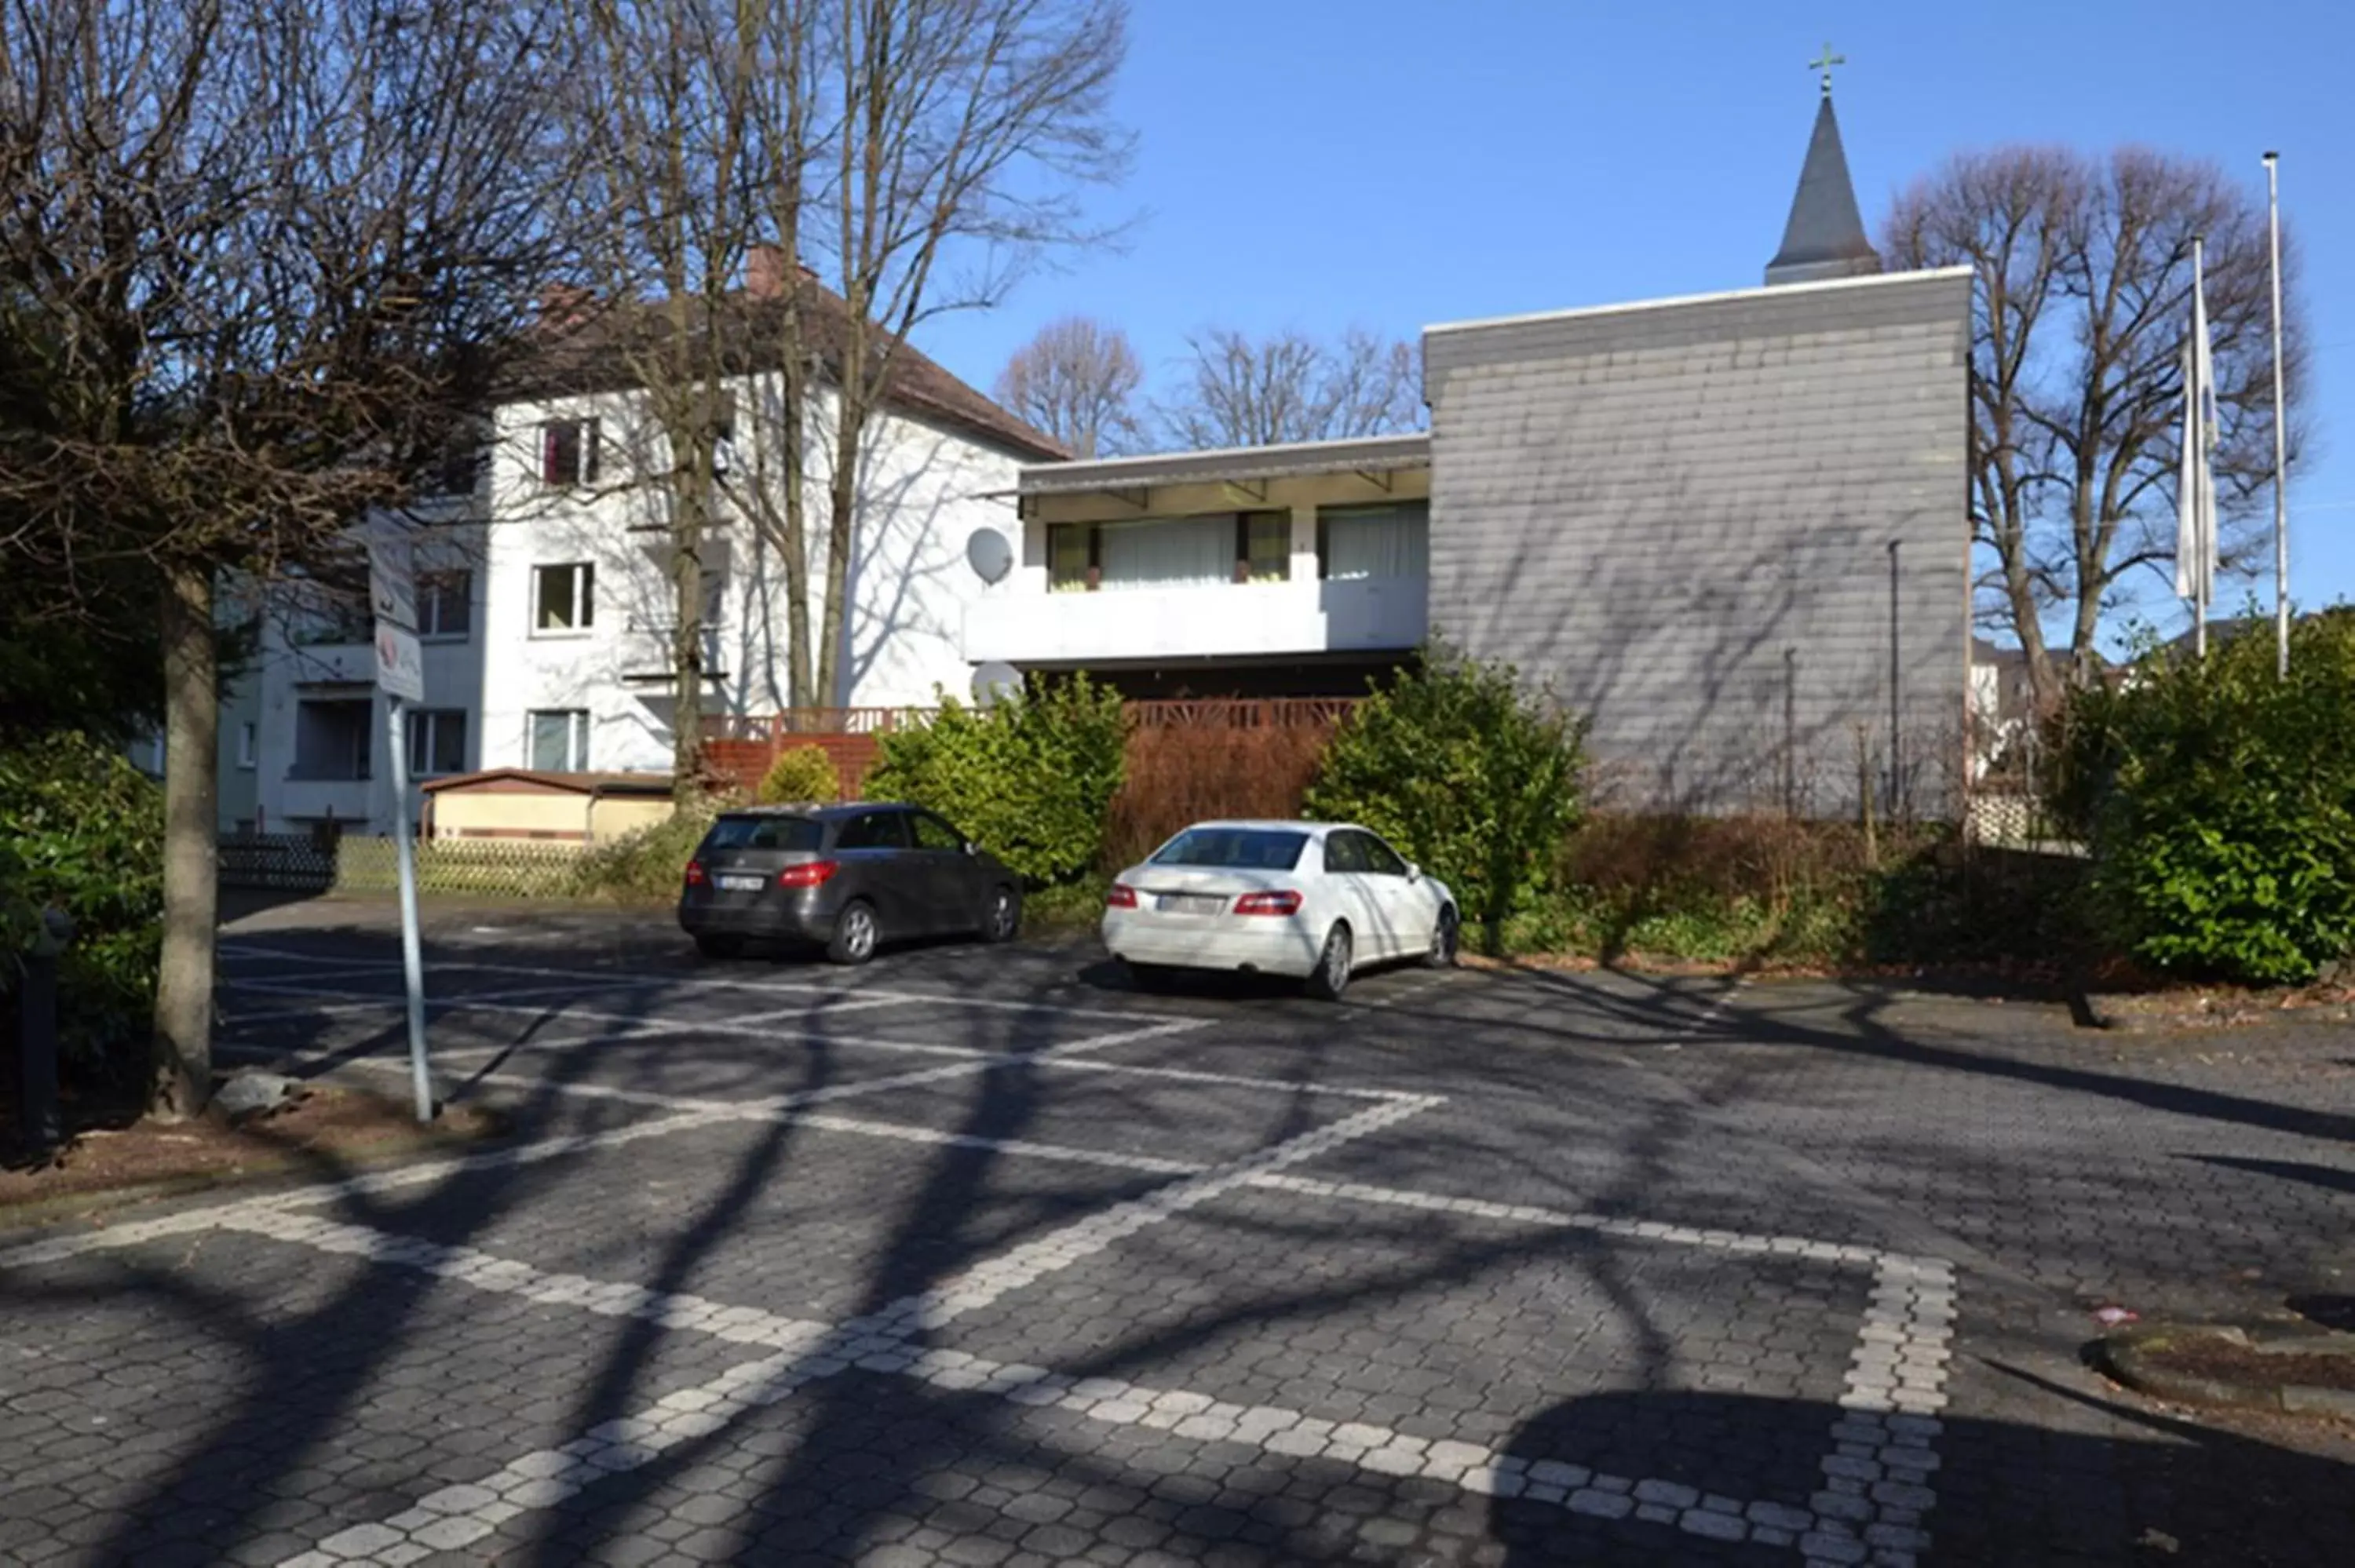 Parking, Property Building in Amedia Siegen, Trademark Collection by Wyndham